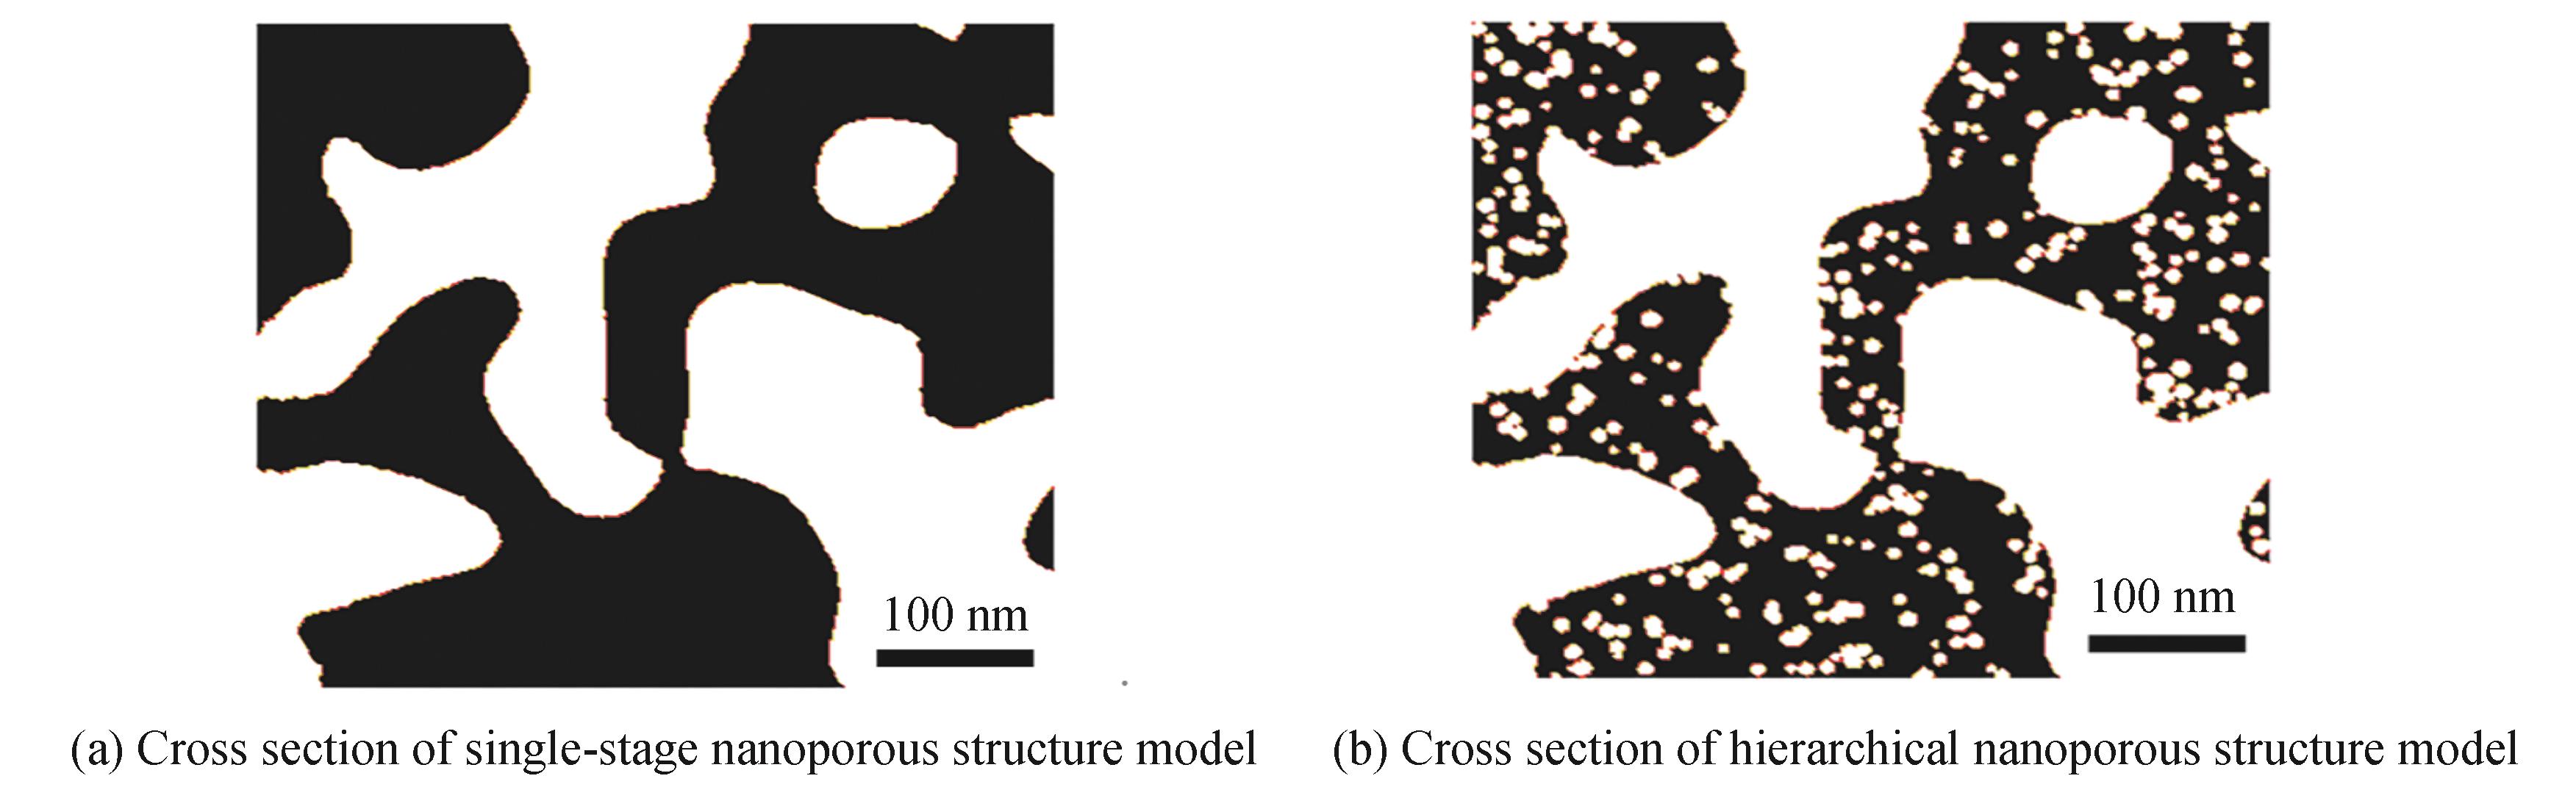 Cross section of single-stage and hierarchical nanoporous structure models